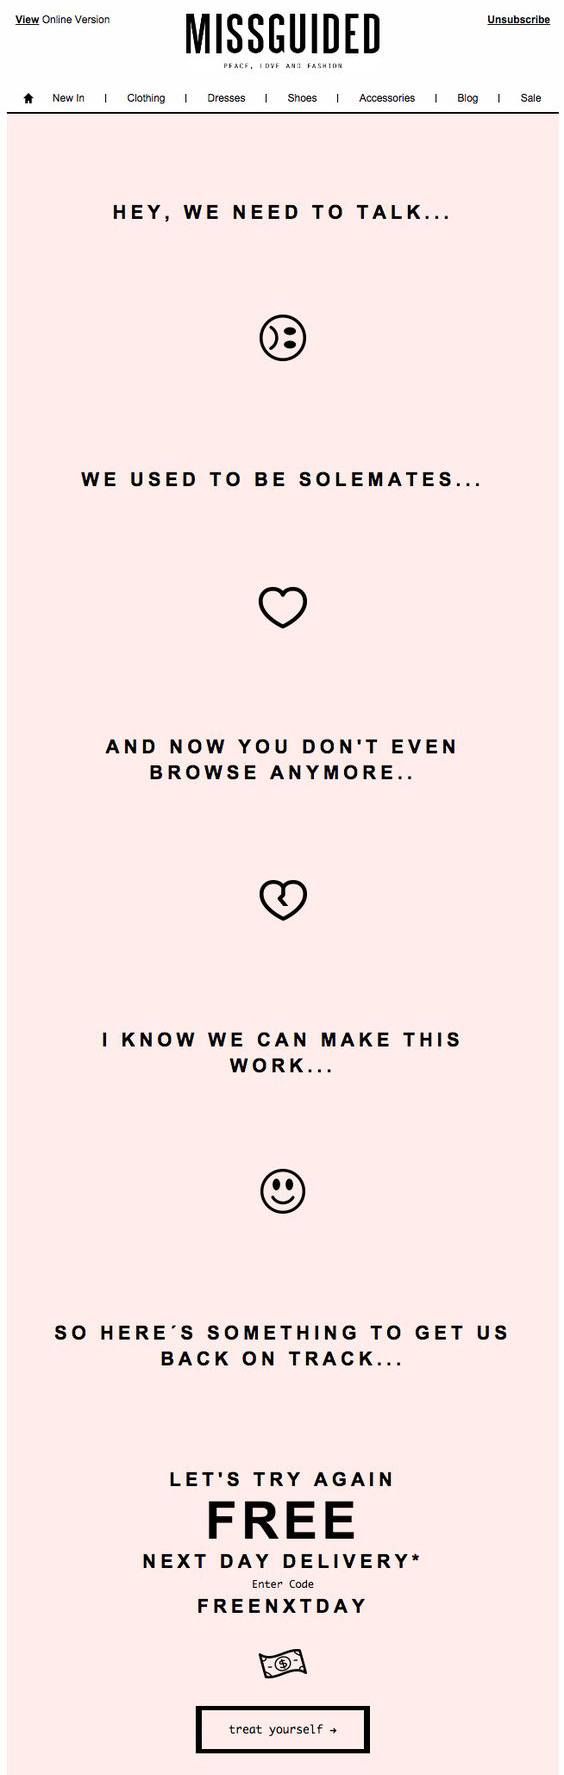 Missguided Email Template